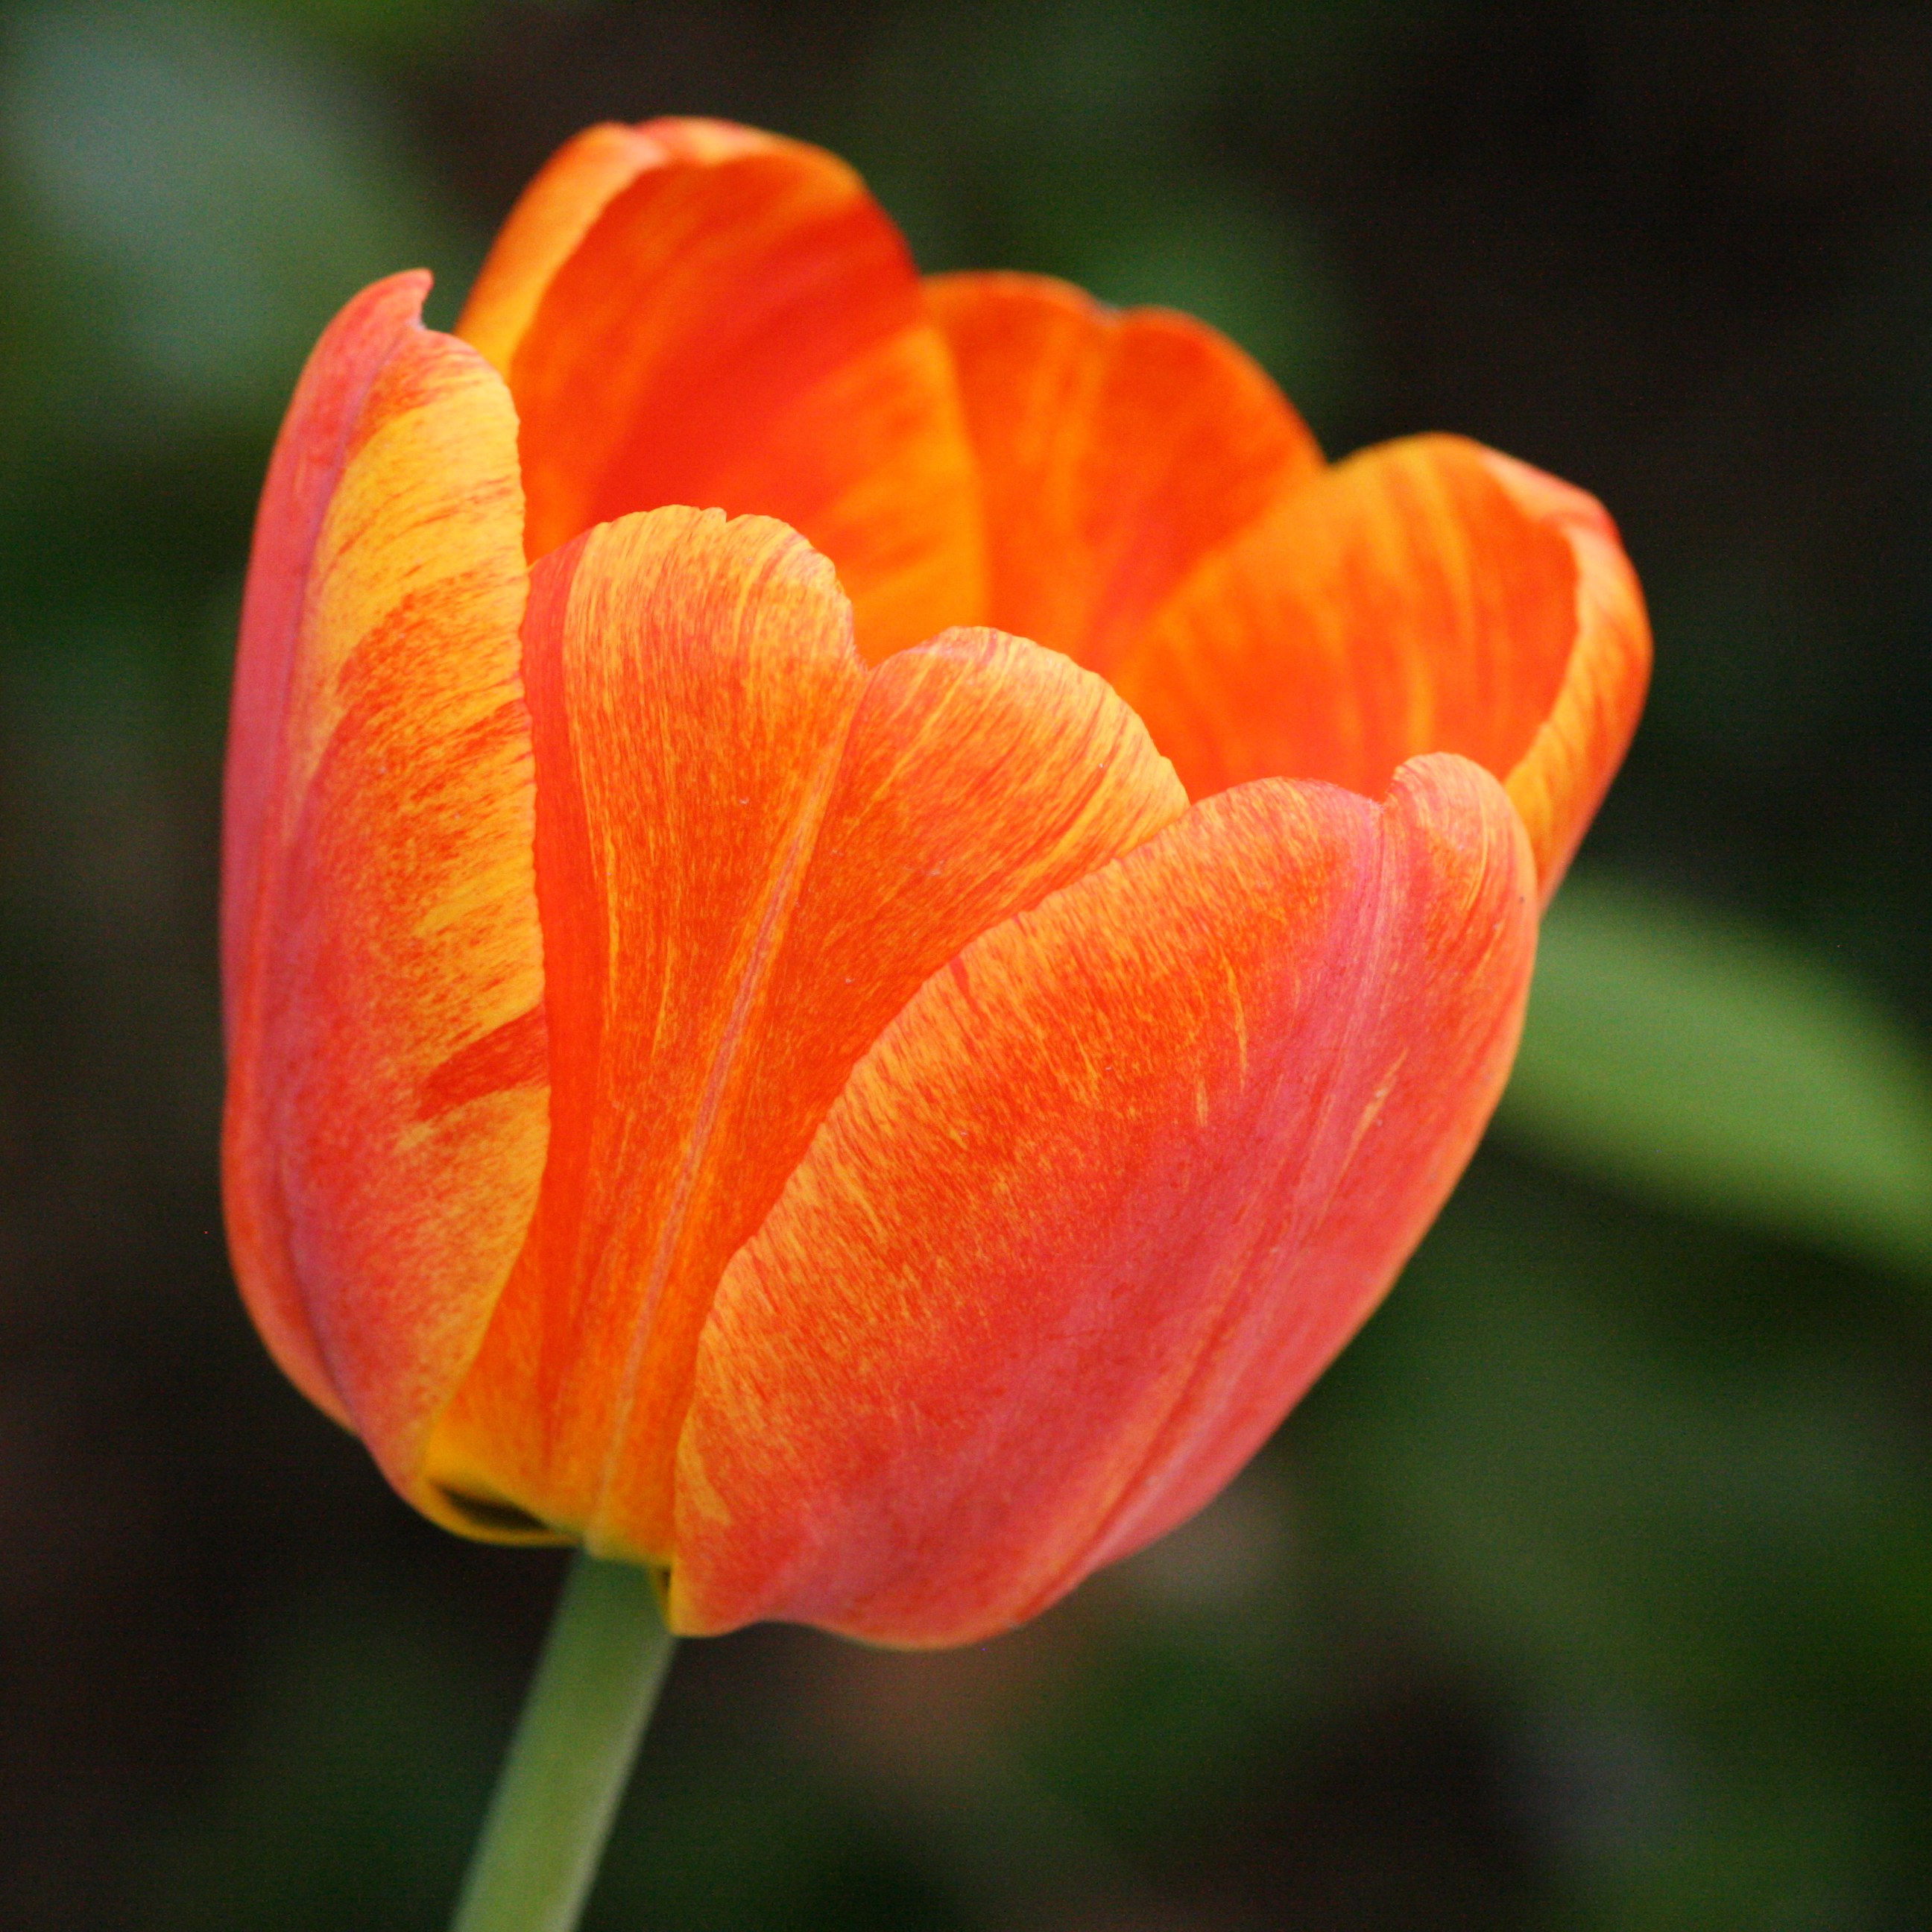 Orange Striped or Variegated Tulip Picture | Free Photograph ...